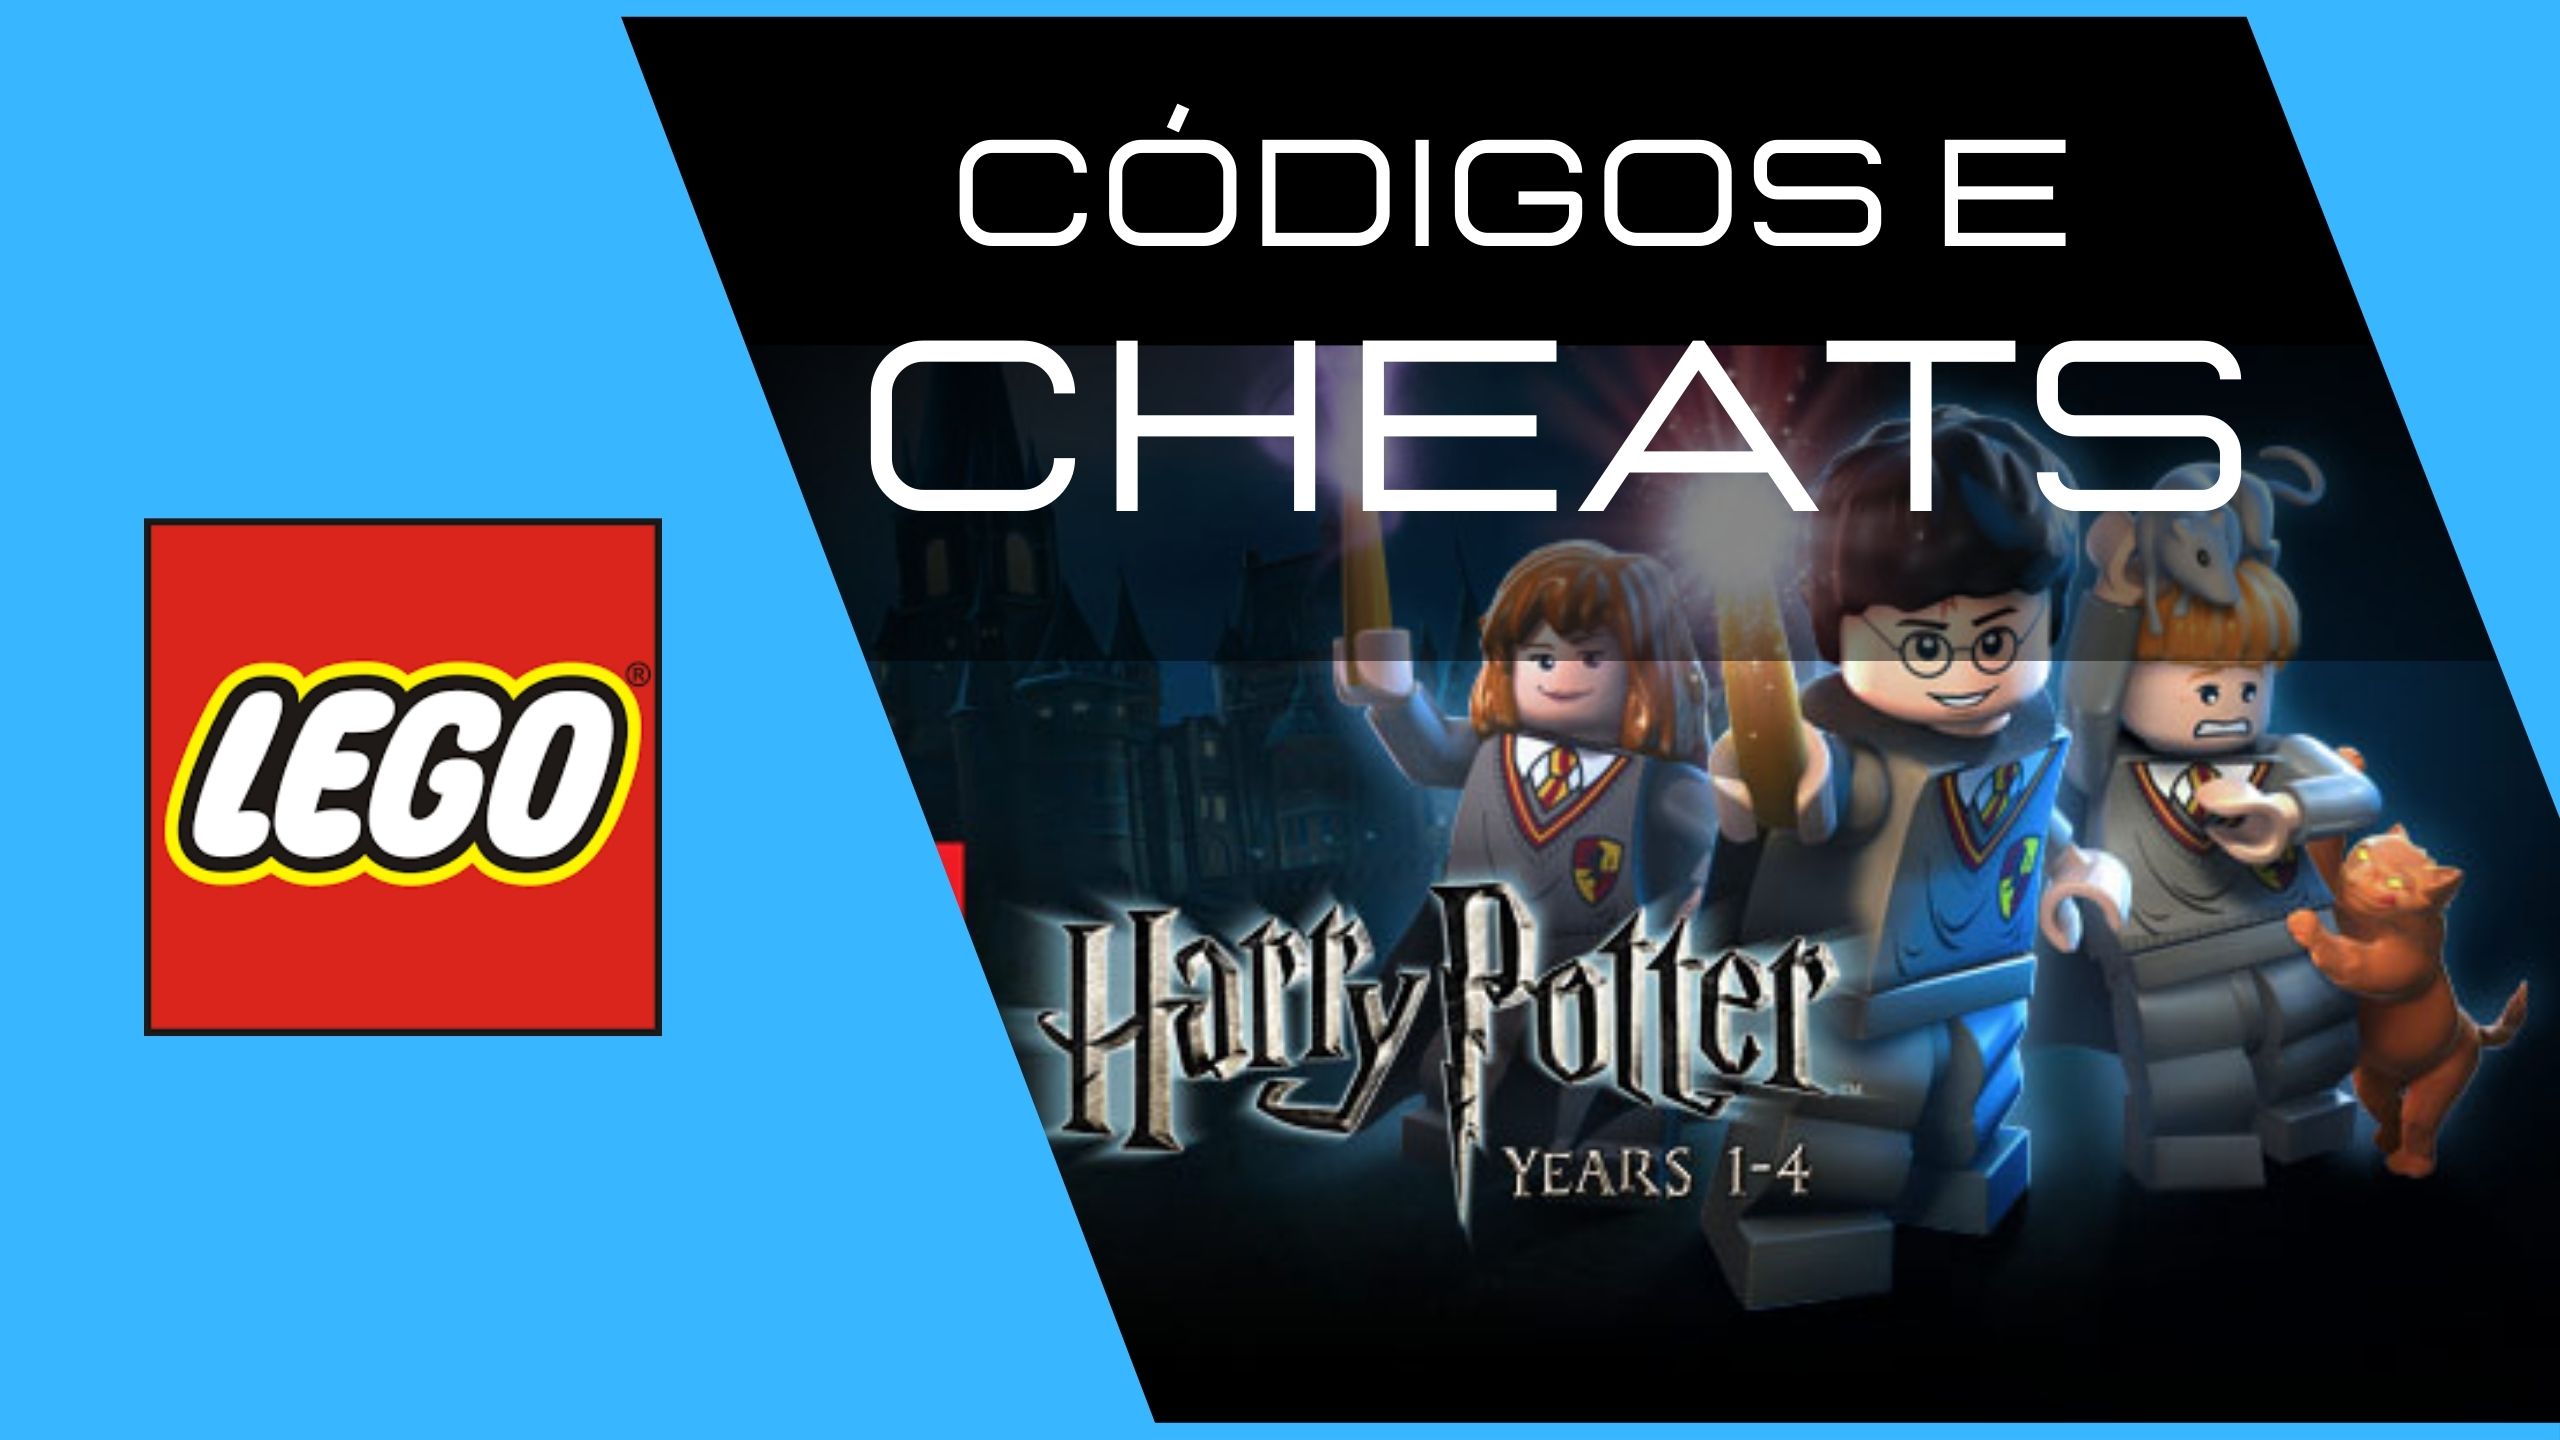 c-digos-do-lego-harry-potter-years-1-4-4everplay